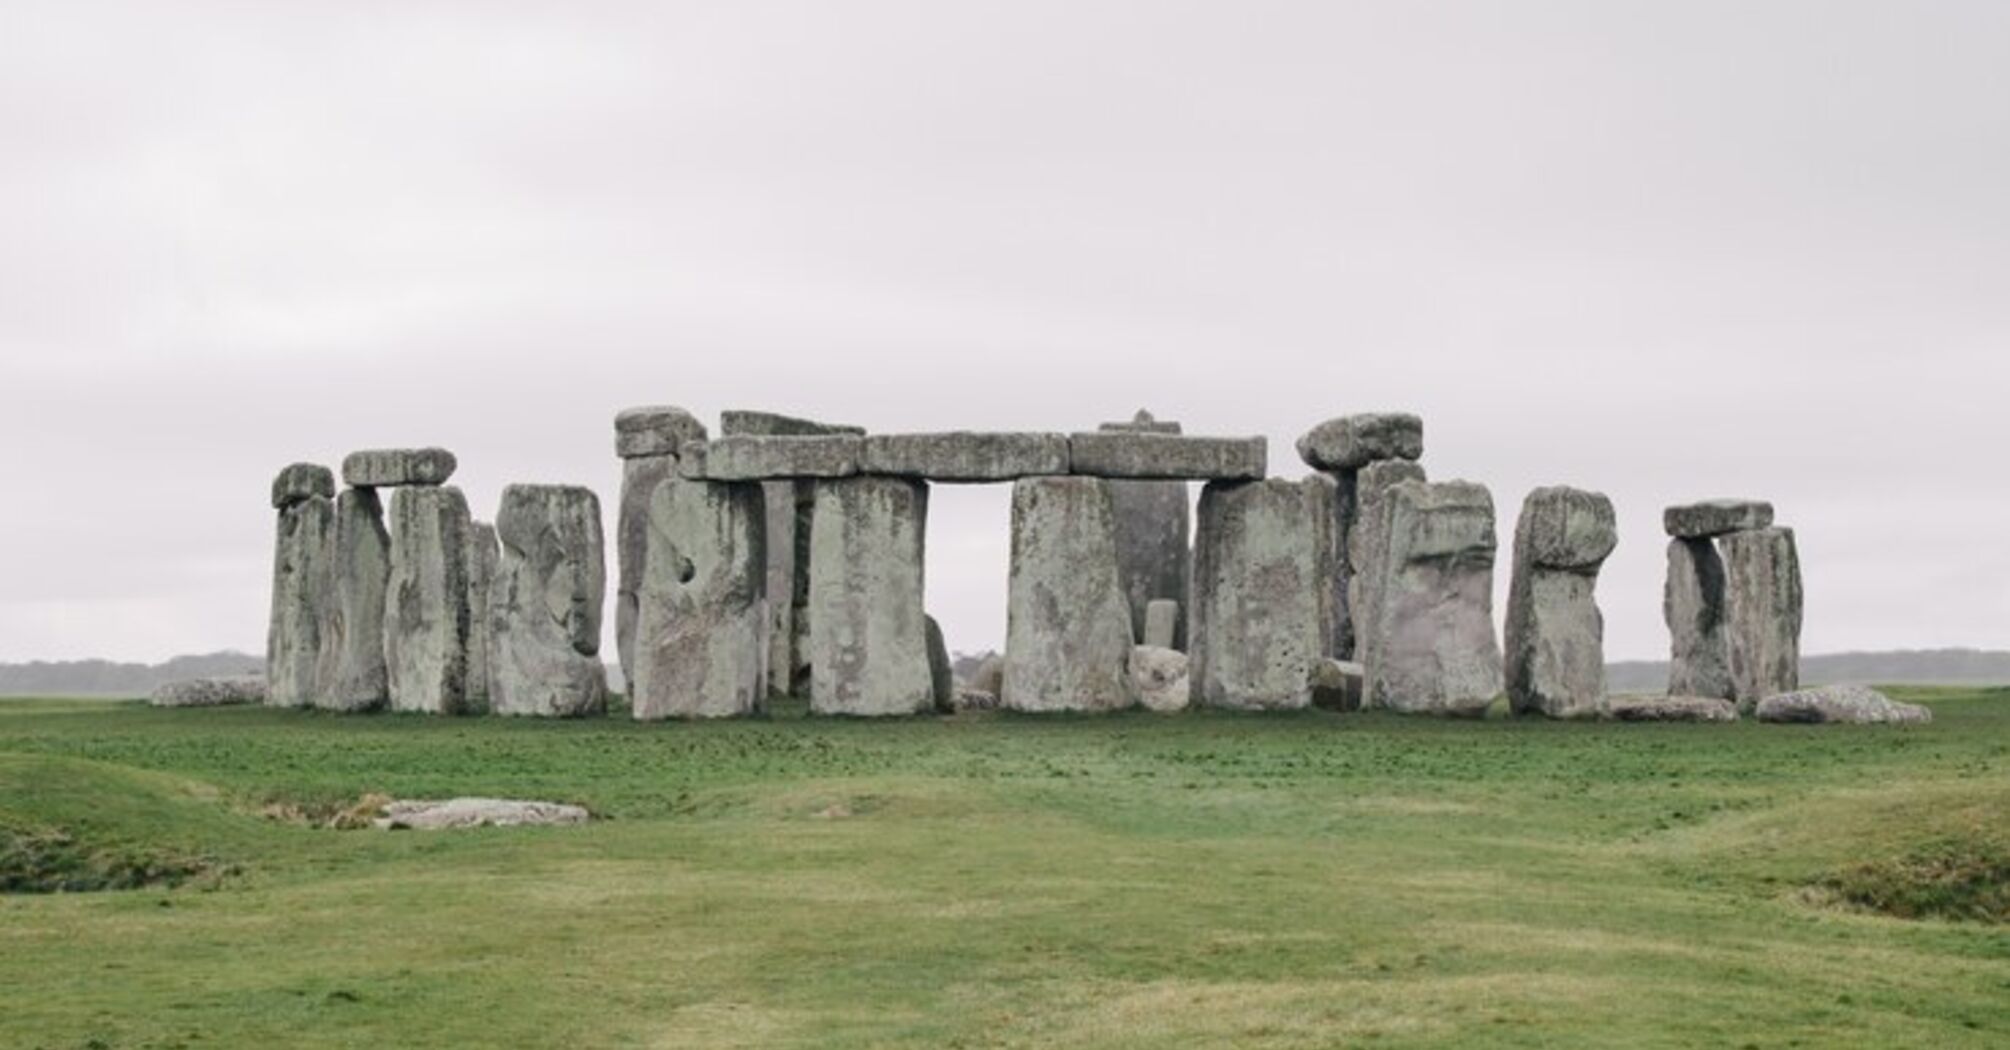 The mystery of the origin of the giant sarsen stones at Stonehenge